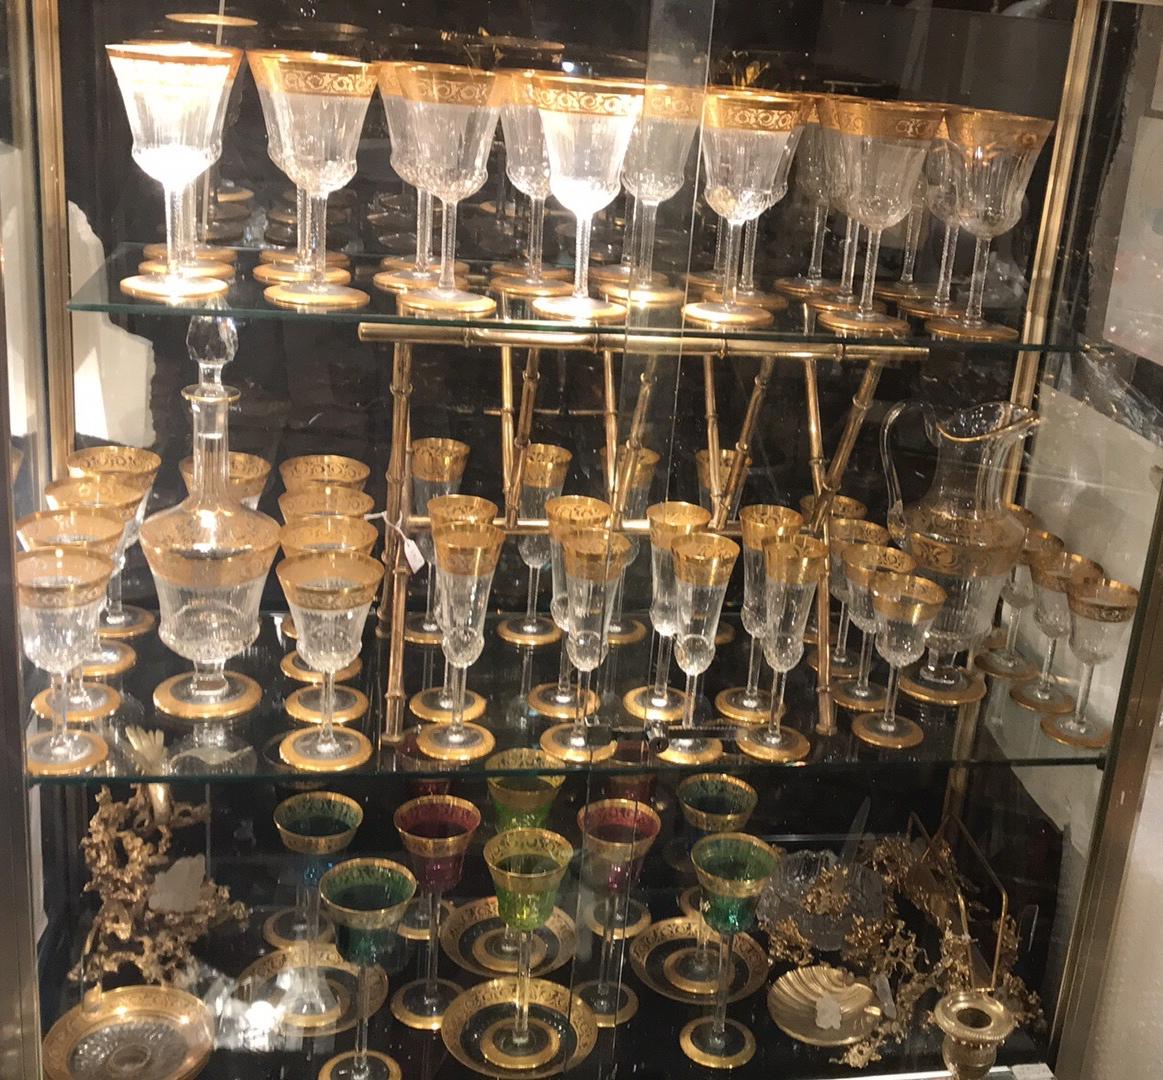 Crystal service:
23 water glasses: H 17.5 cm
Eight cooked wine glasses: H 14 cm
Nine wine glasses: H 16,5 cm
12 champagne flutes: H 19 cm
Two carafe: H 36 cm
Two water jug: H 29 cm
Eight saucers: Diameter 14.5 cm
6 Wash Finger
8 Champagne Glasses
12